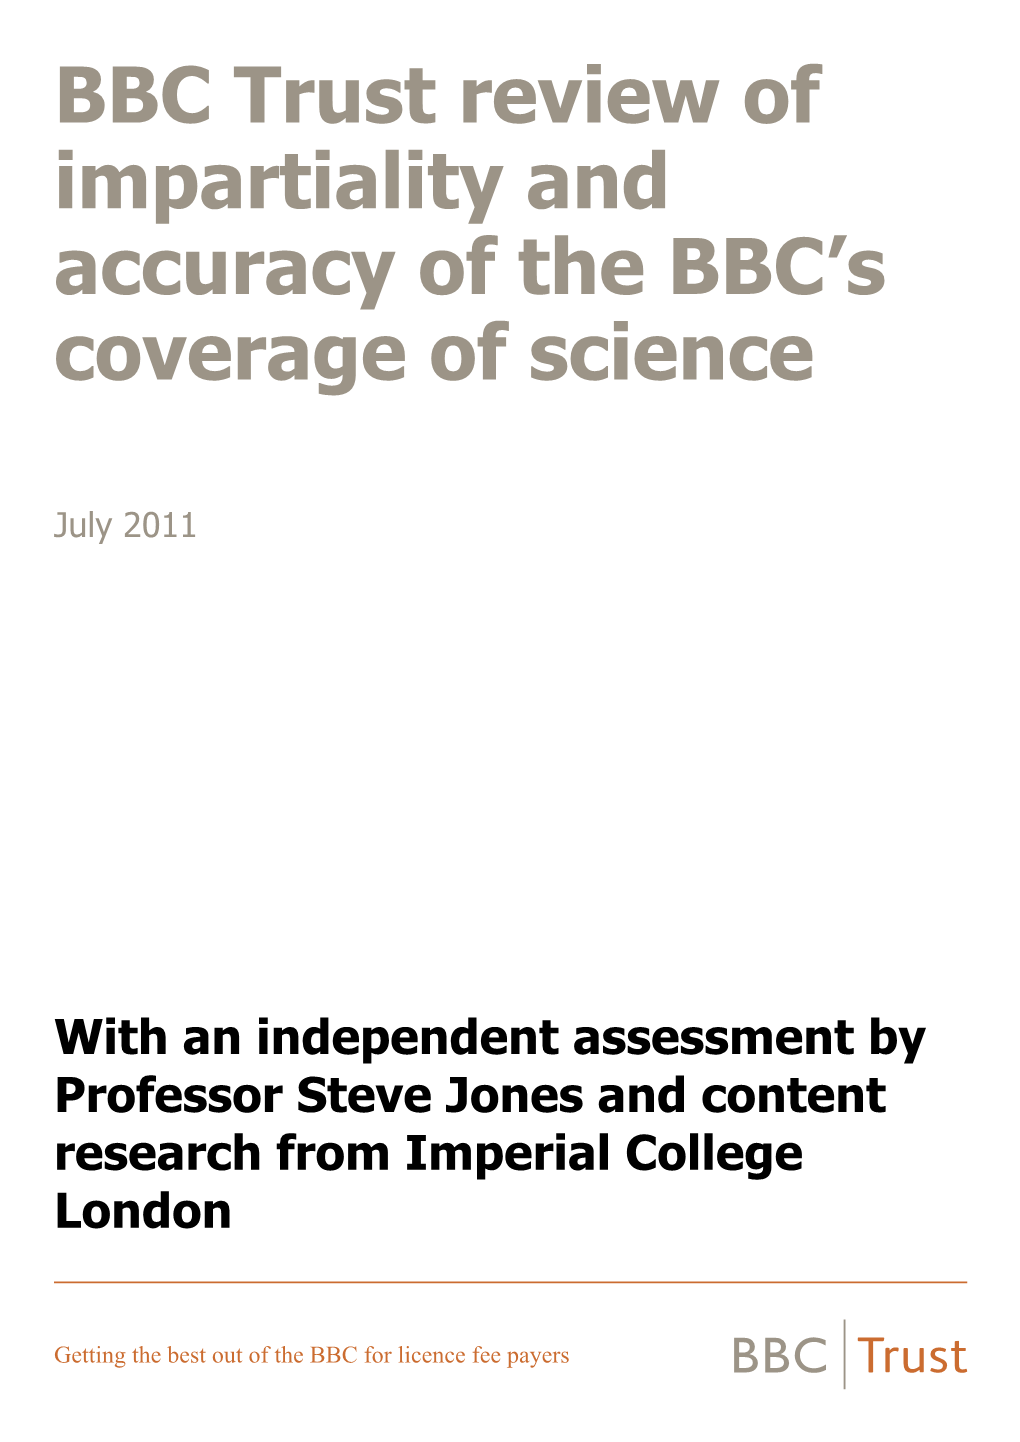 BBC Trust Review of Impartiality and Accuracy of the BBC’S Coverage of Science